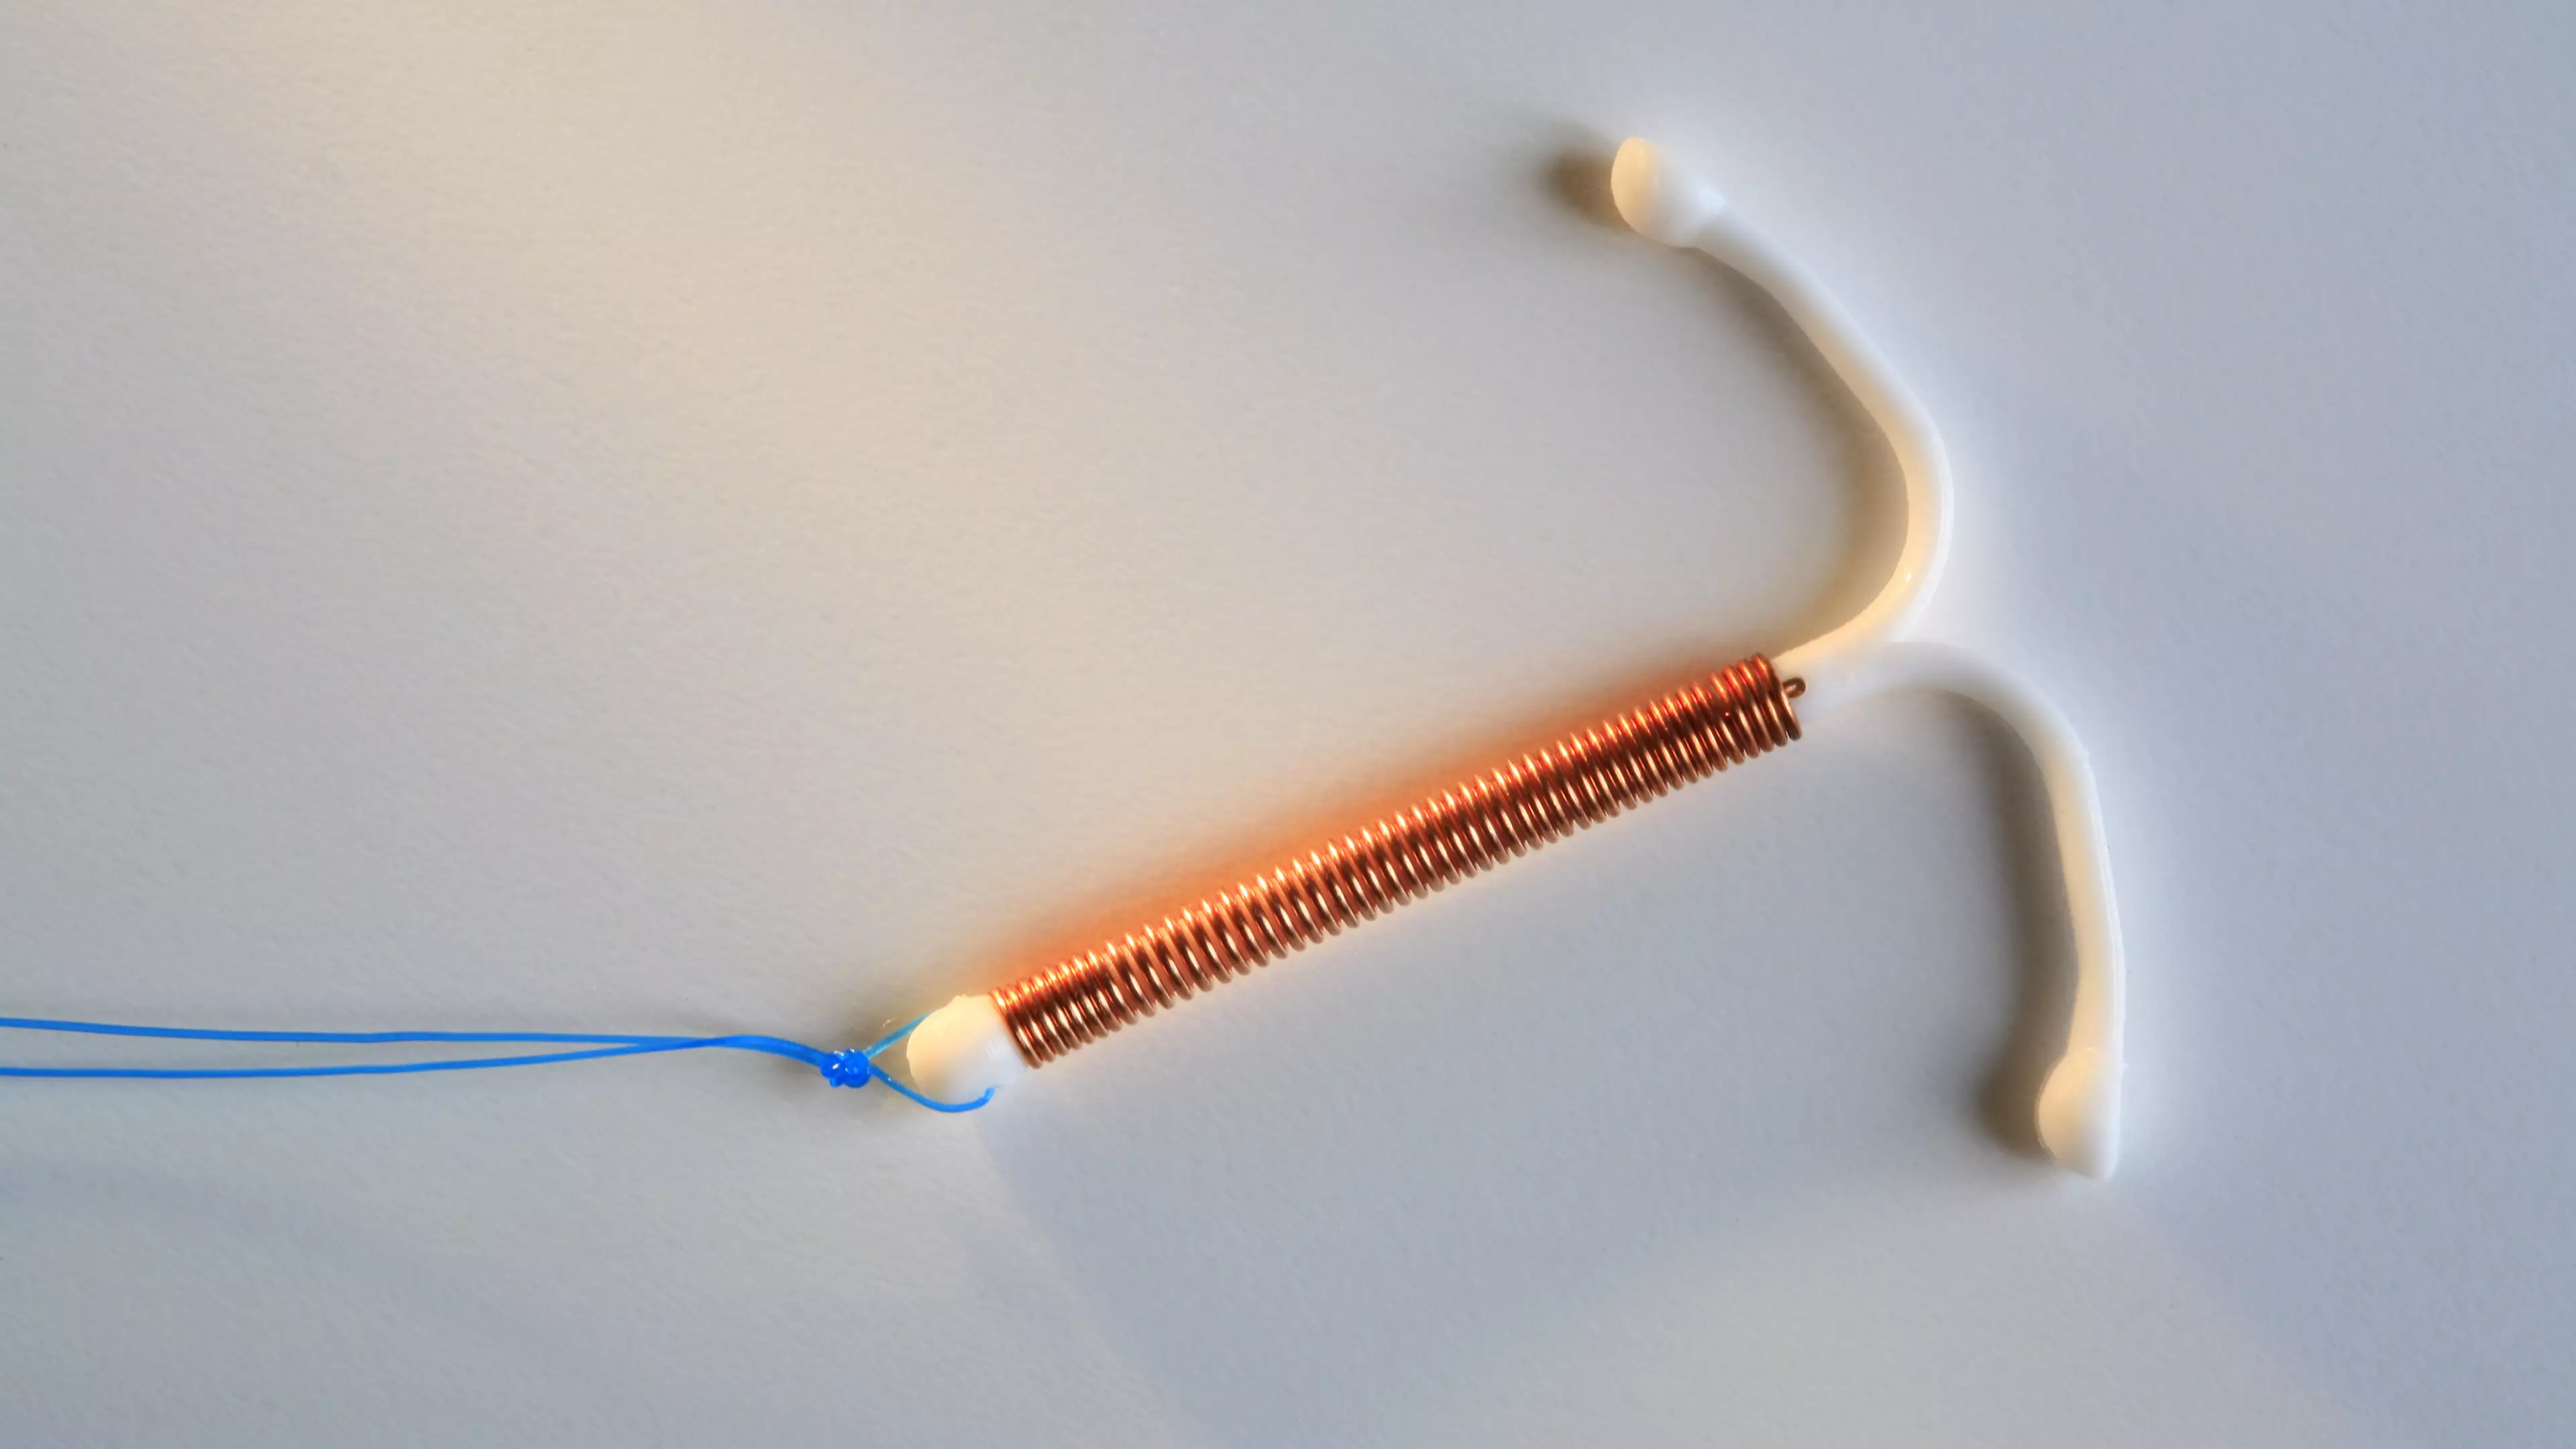 Women Are Calling For Better Pain Relief For IUD Insertions And Removals